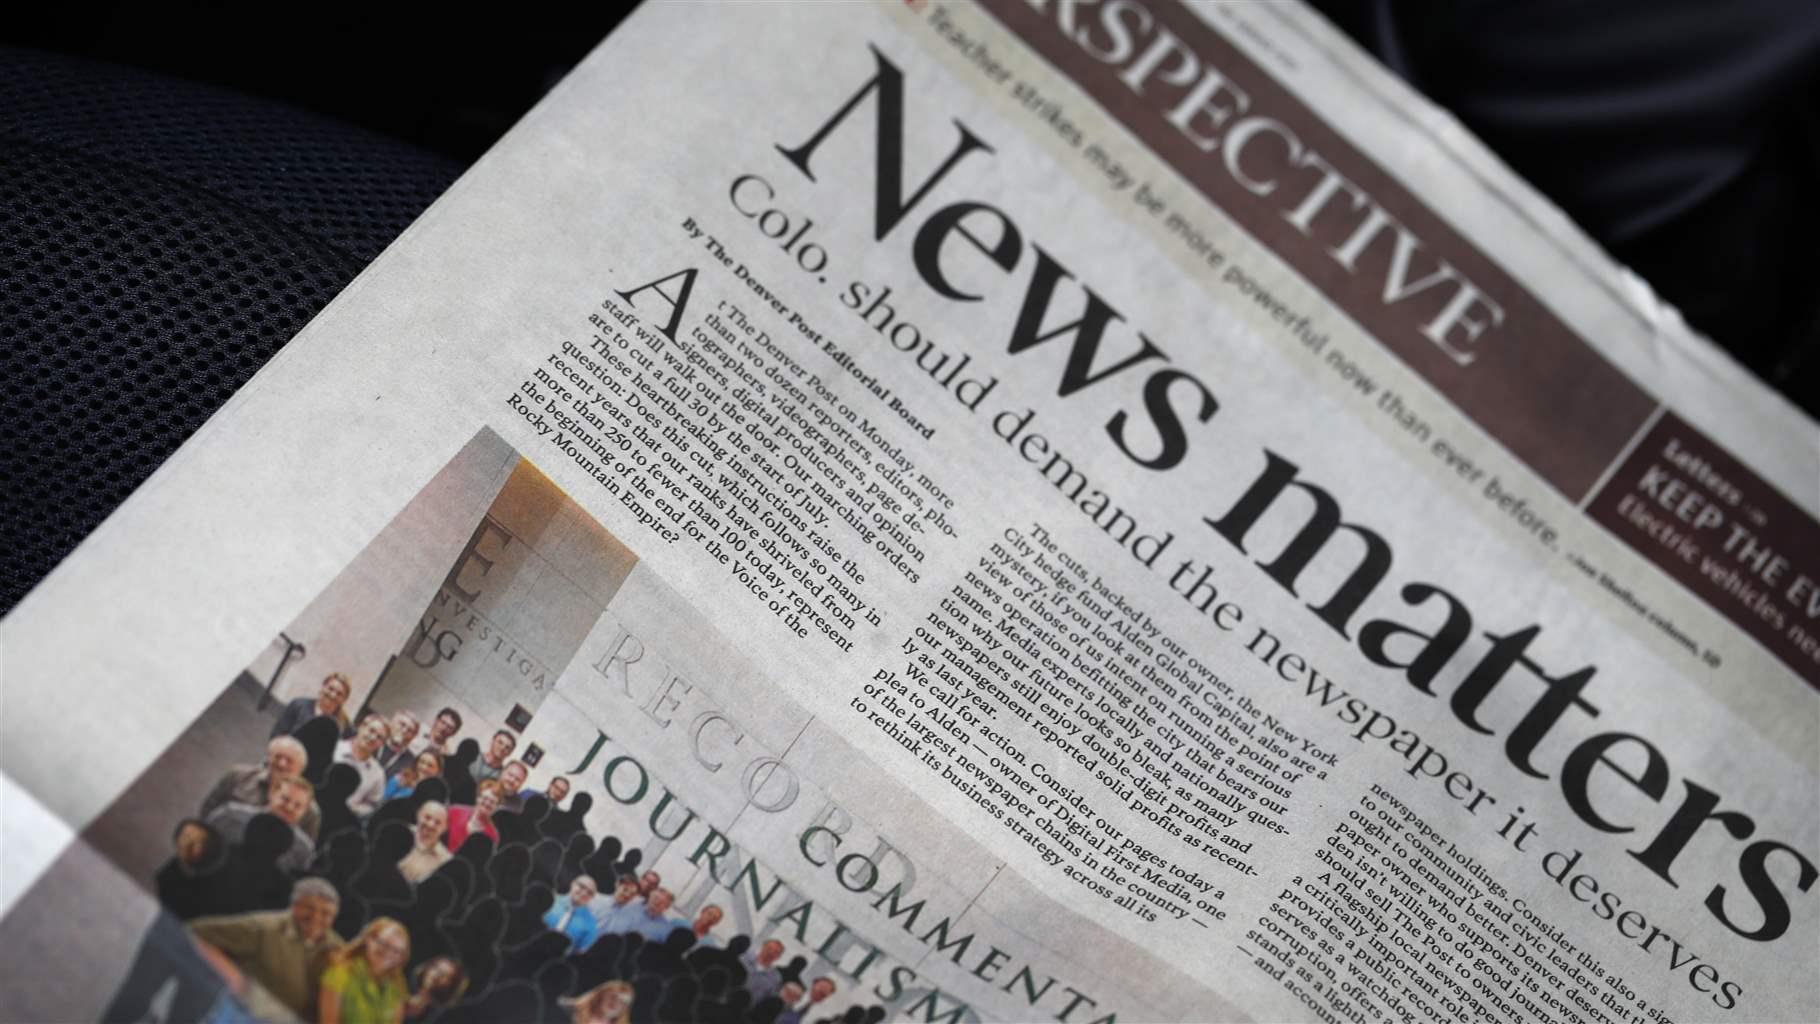 A newspaper with the headline "News matters"